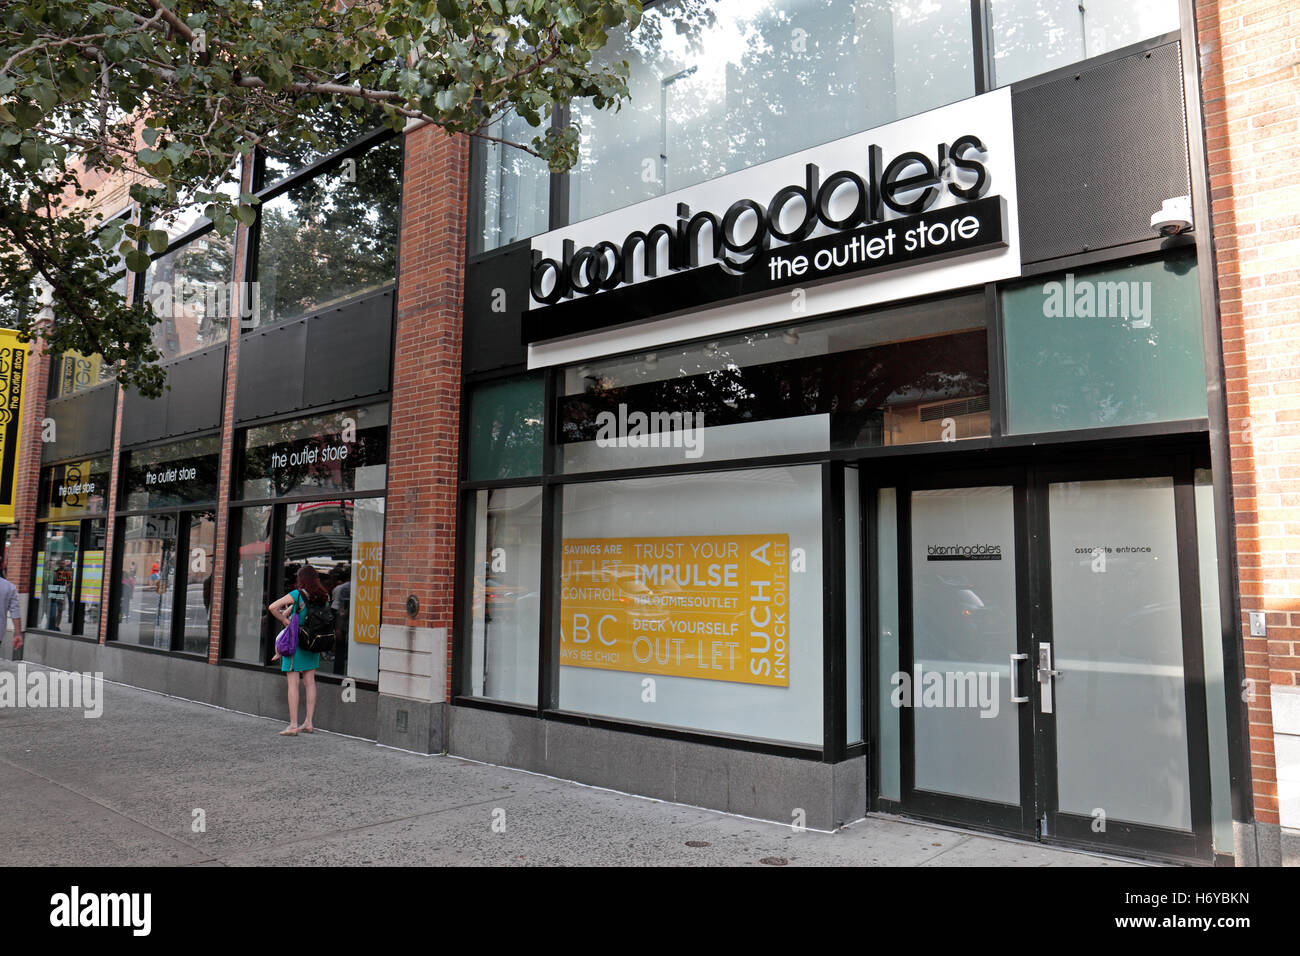 The Blooningdales Outlet Store in Manhattan, New York, United States Stock  Photo - Alamy